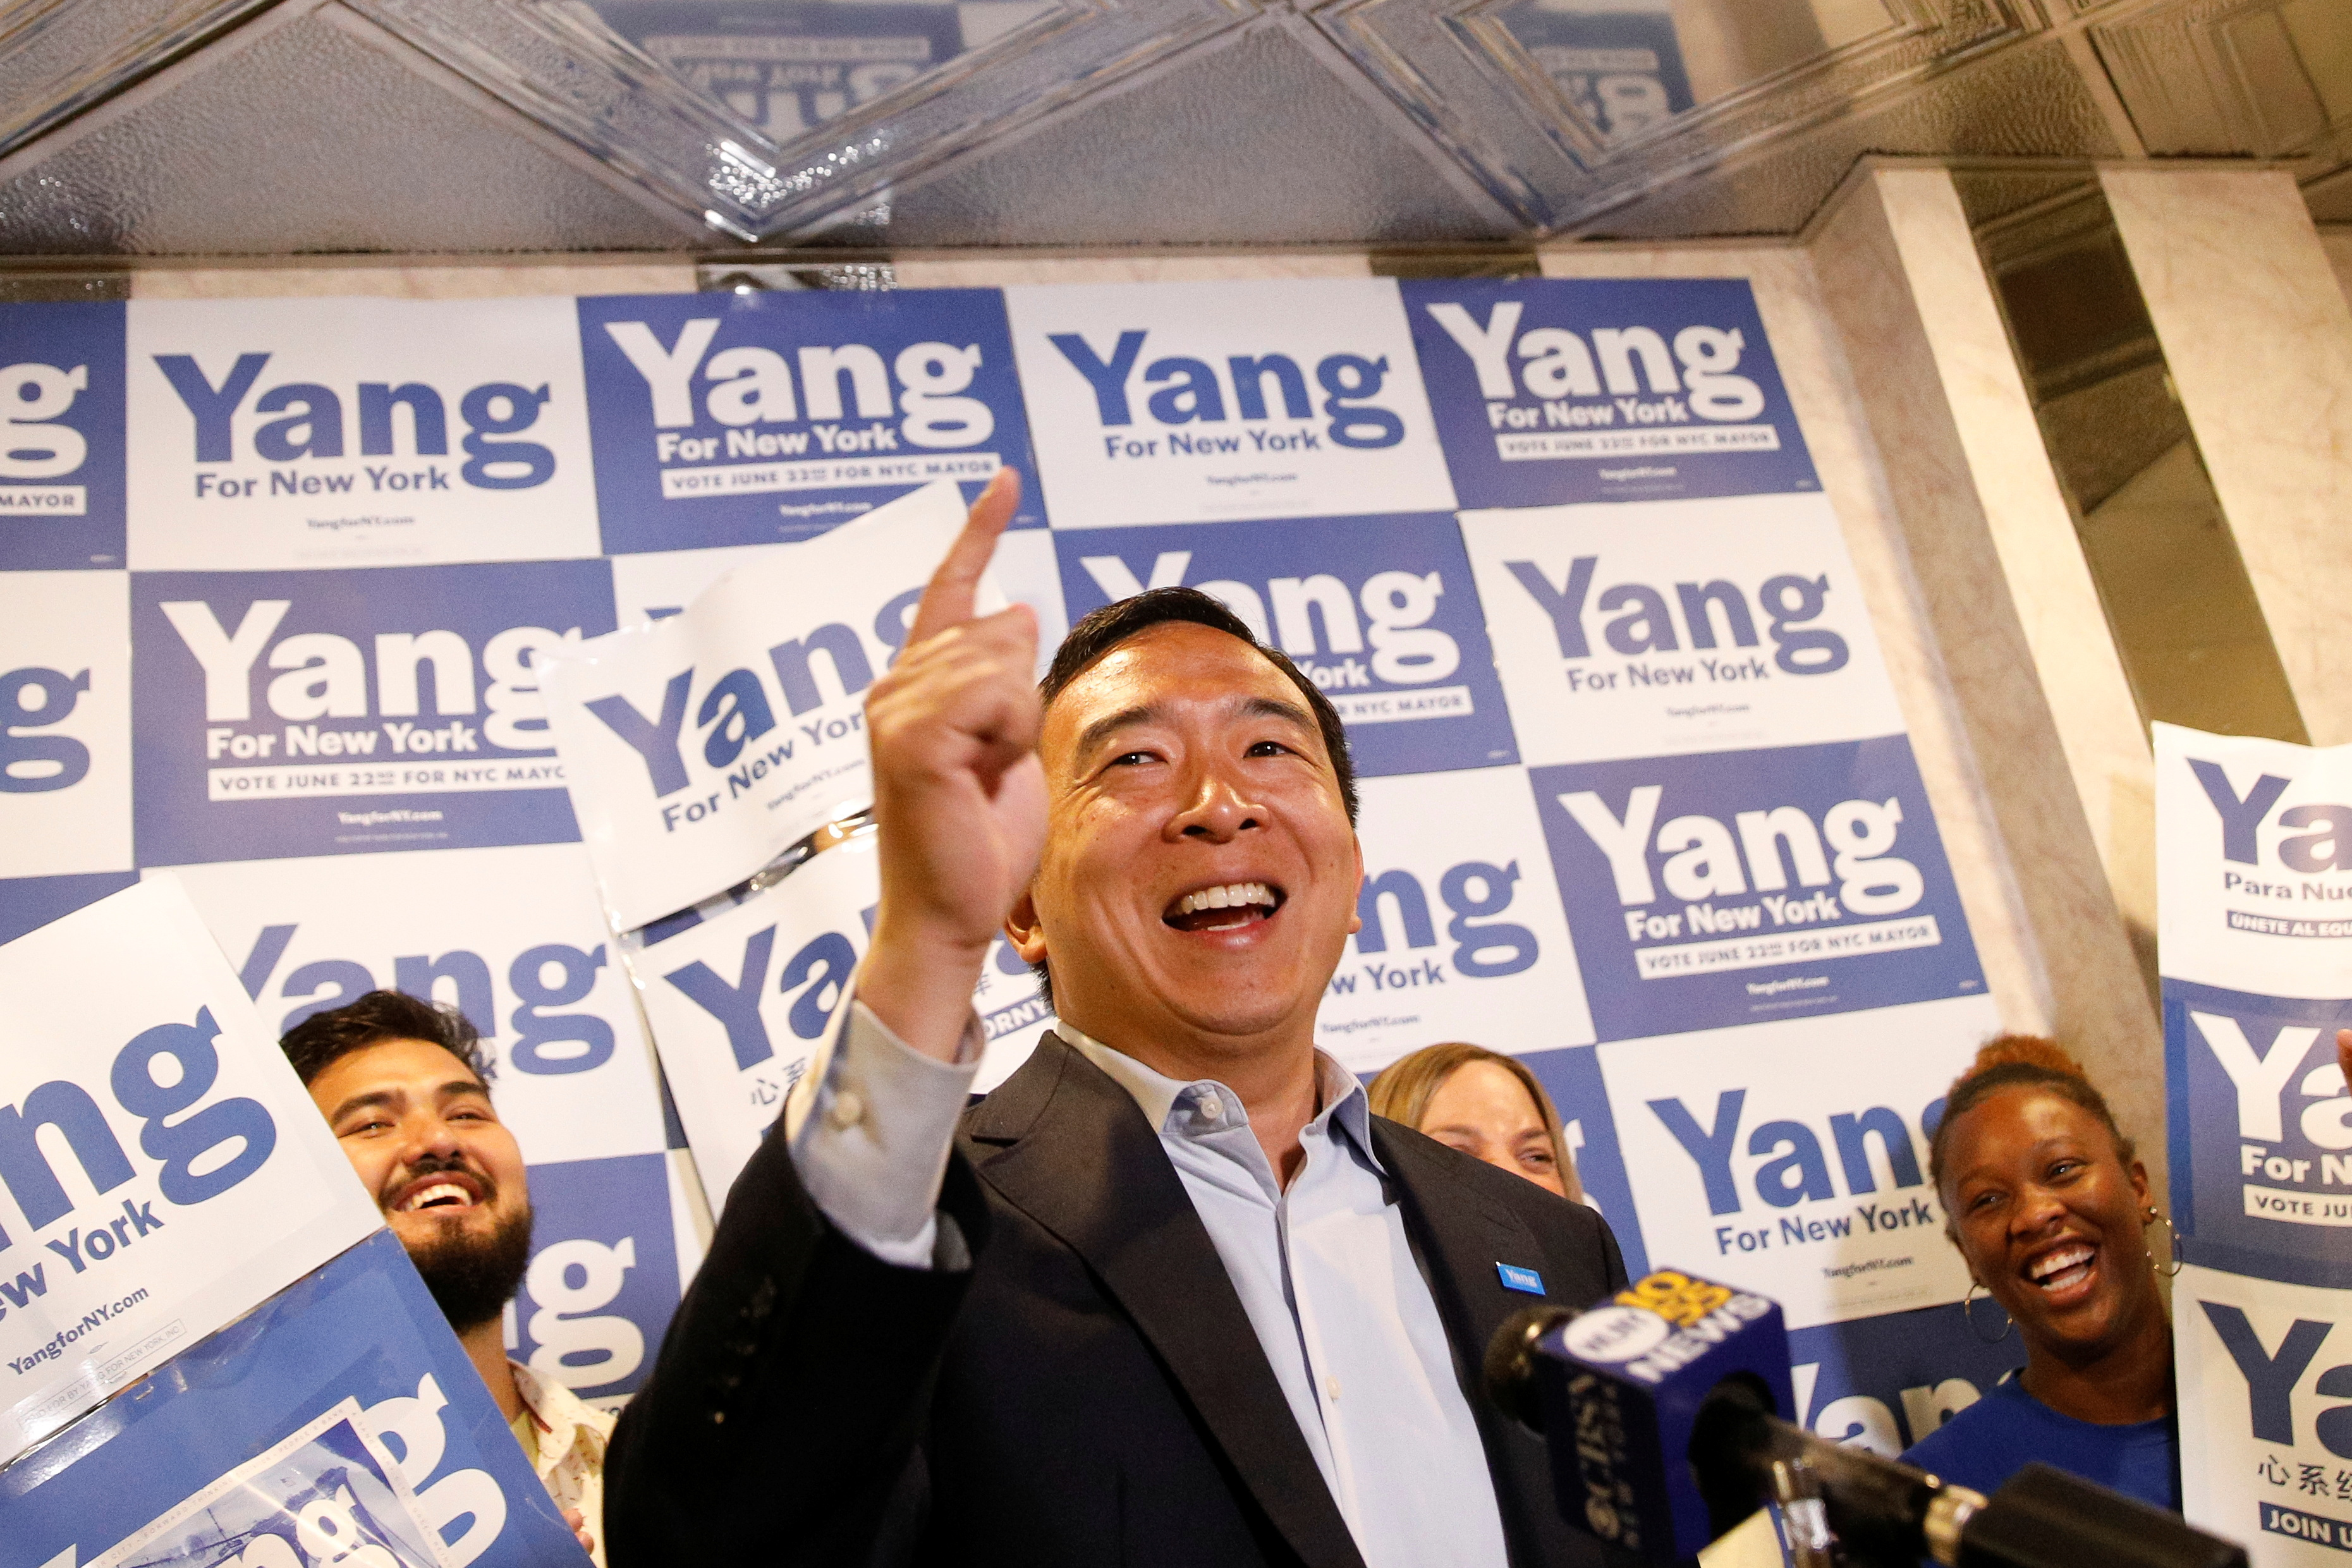 Andrew Yang, Democratic candidate for New York City Mayor, speaks during a campaign appearance in Brooklyn, New York